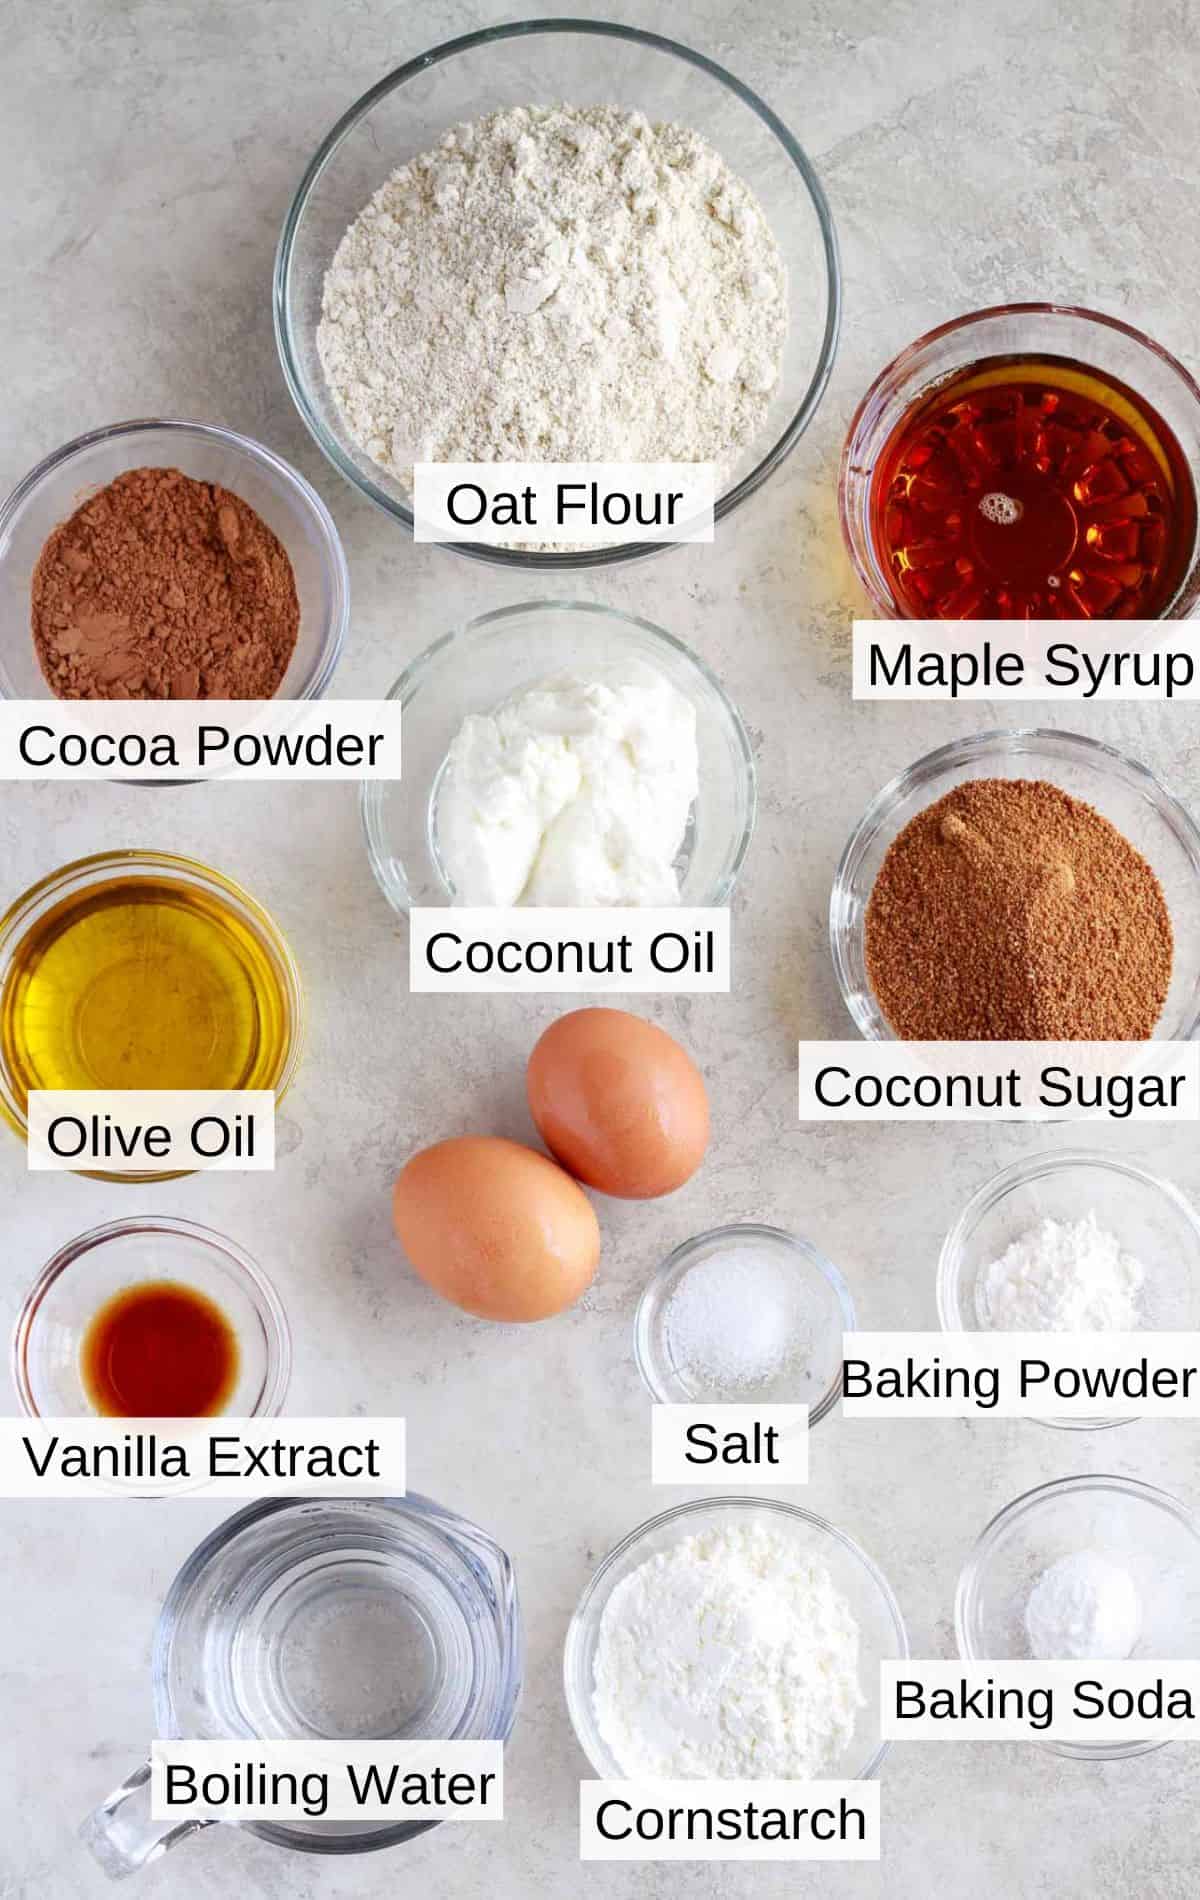 All of the ingredients to make a chocolate oat flour cake